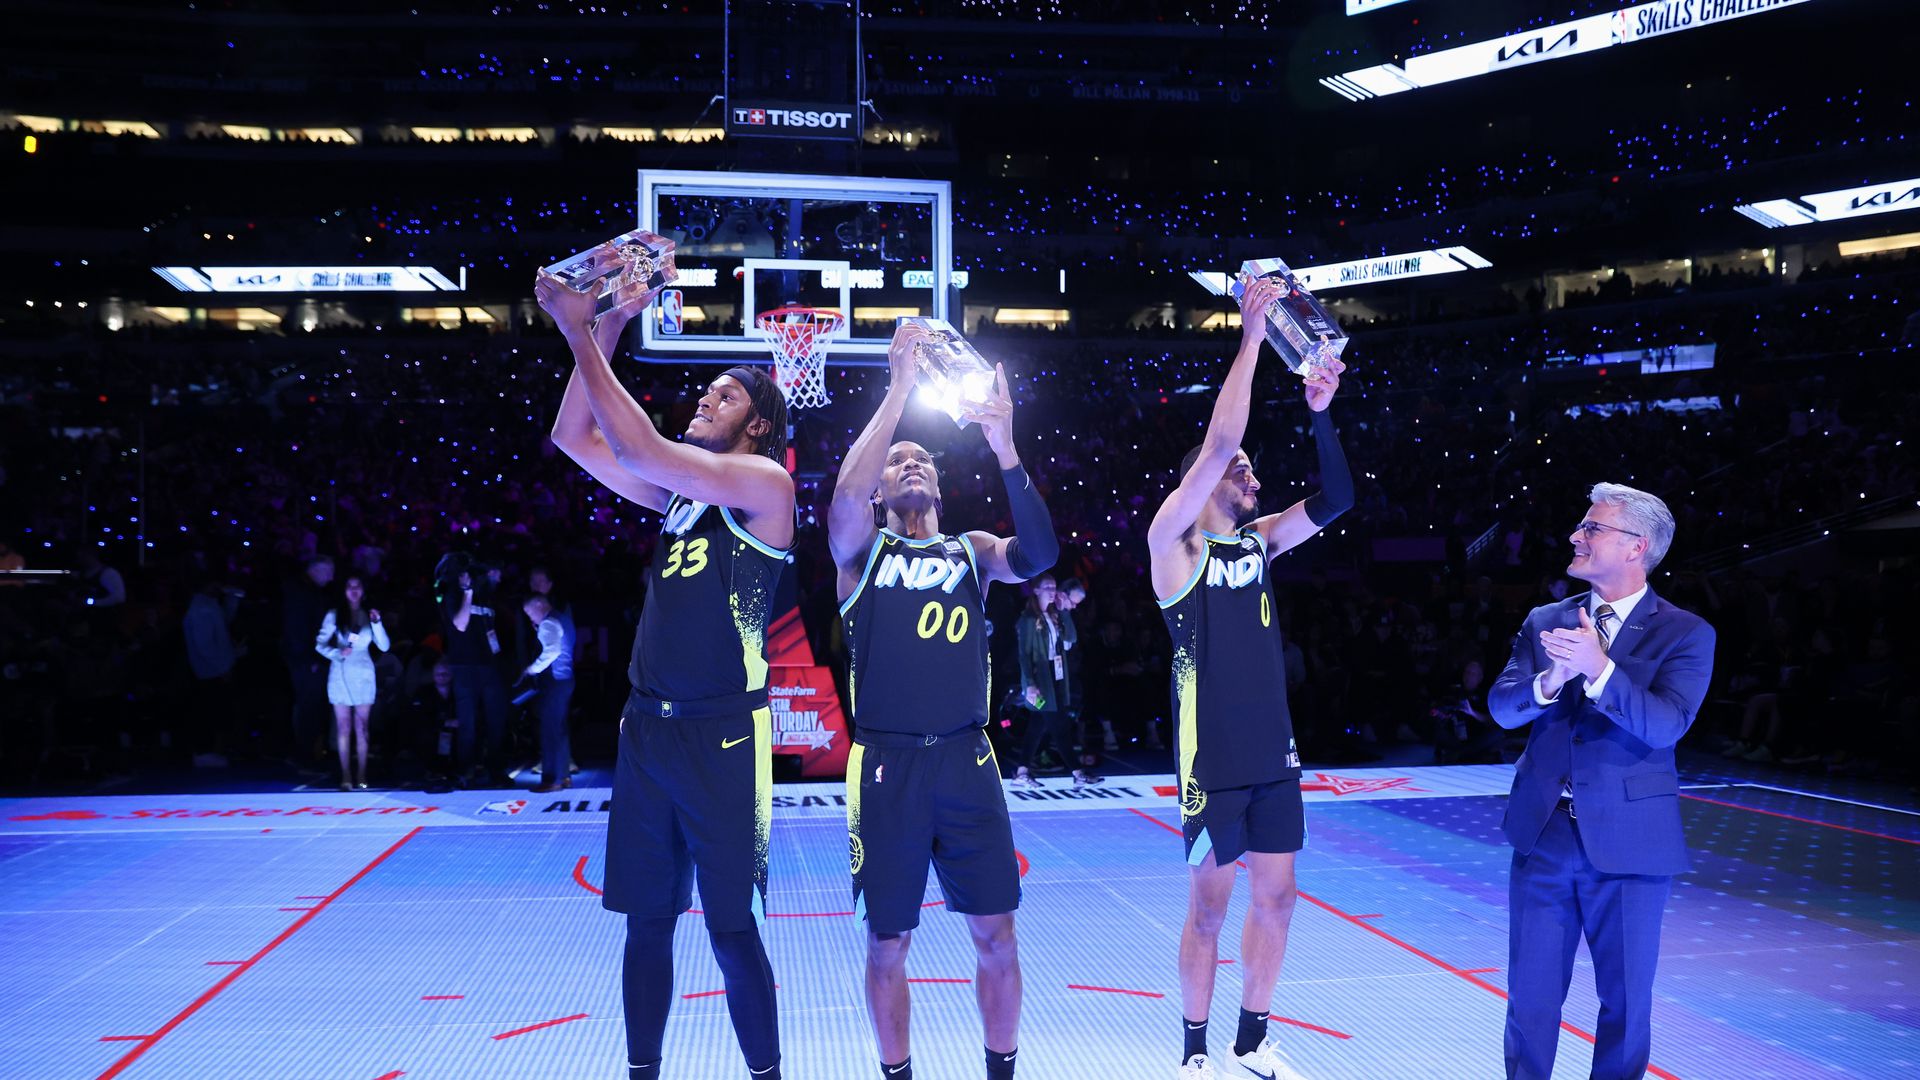 Three basketball players on a court holding trophies.